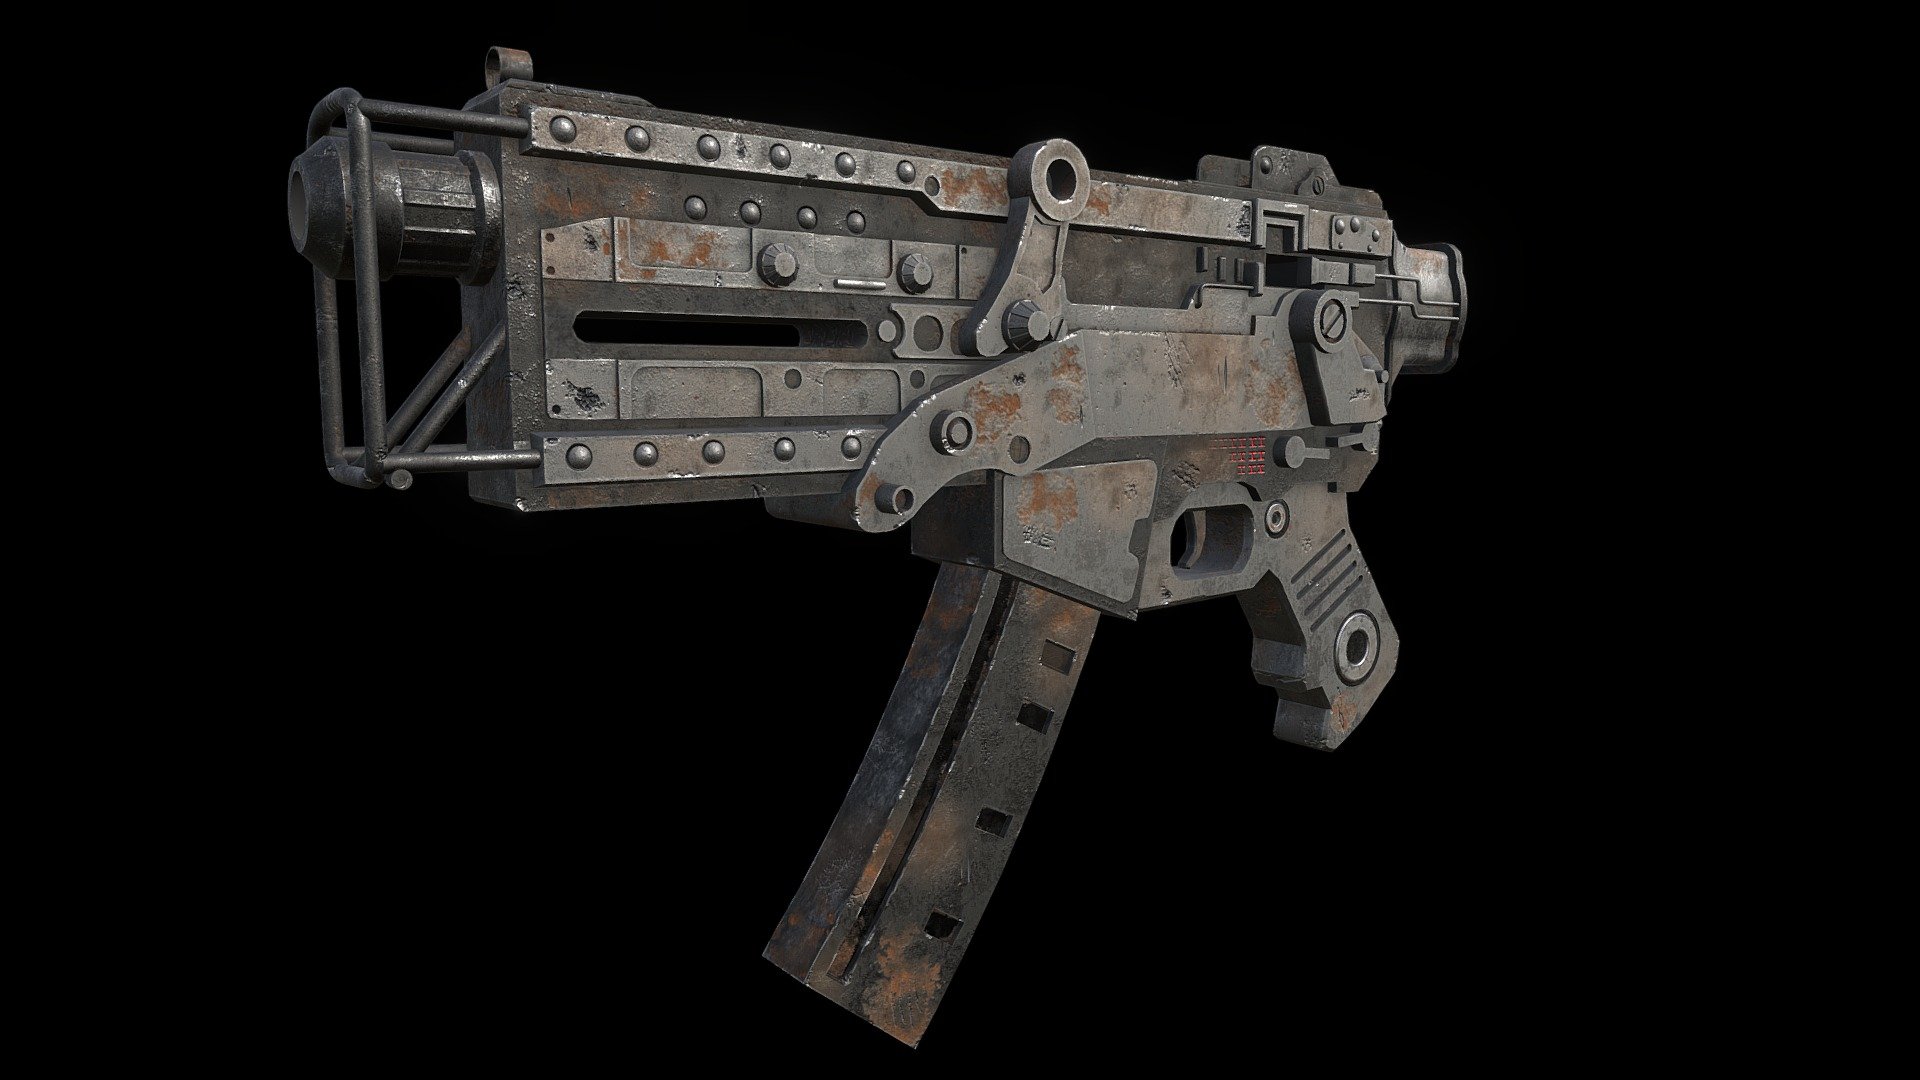 10mm Submachine Gun from the Fallout Series.
Now modded into Fallout 4.
Download at www.nexusmods.com/fallout4/mods/22223/? or https://bethesda.net/en/mods/fallout4/mod-detail/3959093 - Fallout 10mm SMG - 3D model by Ryley Dodd (@ryleydodd) 3d model